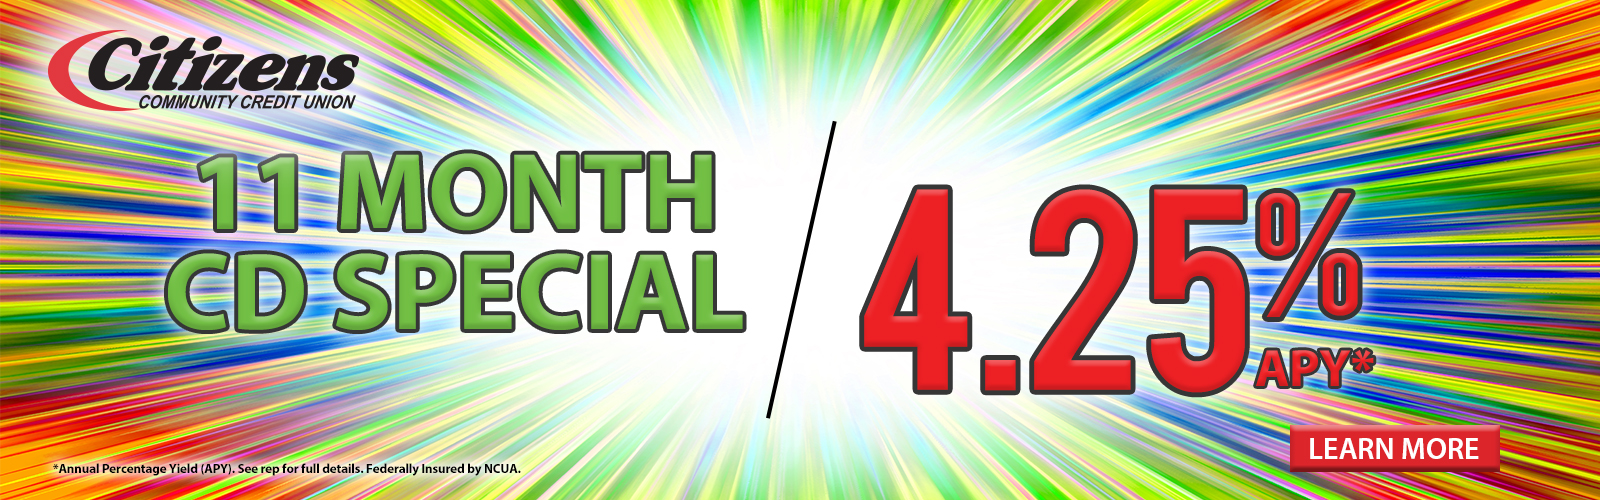 11 Month CD Special - 4.25% APY*. Click here for more information!